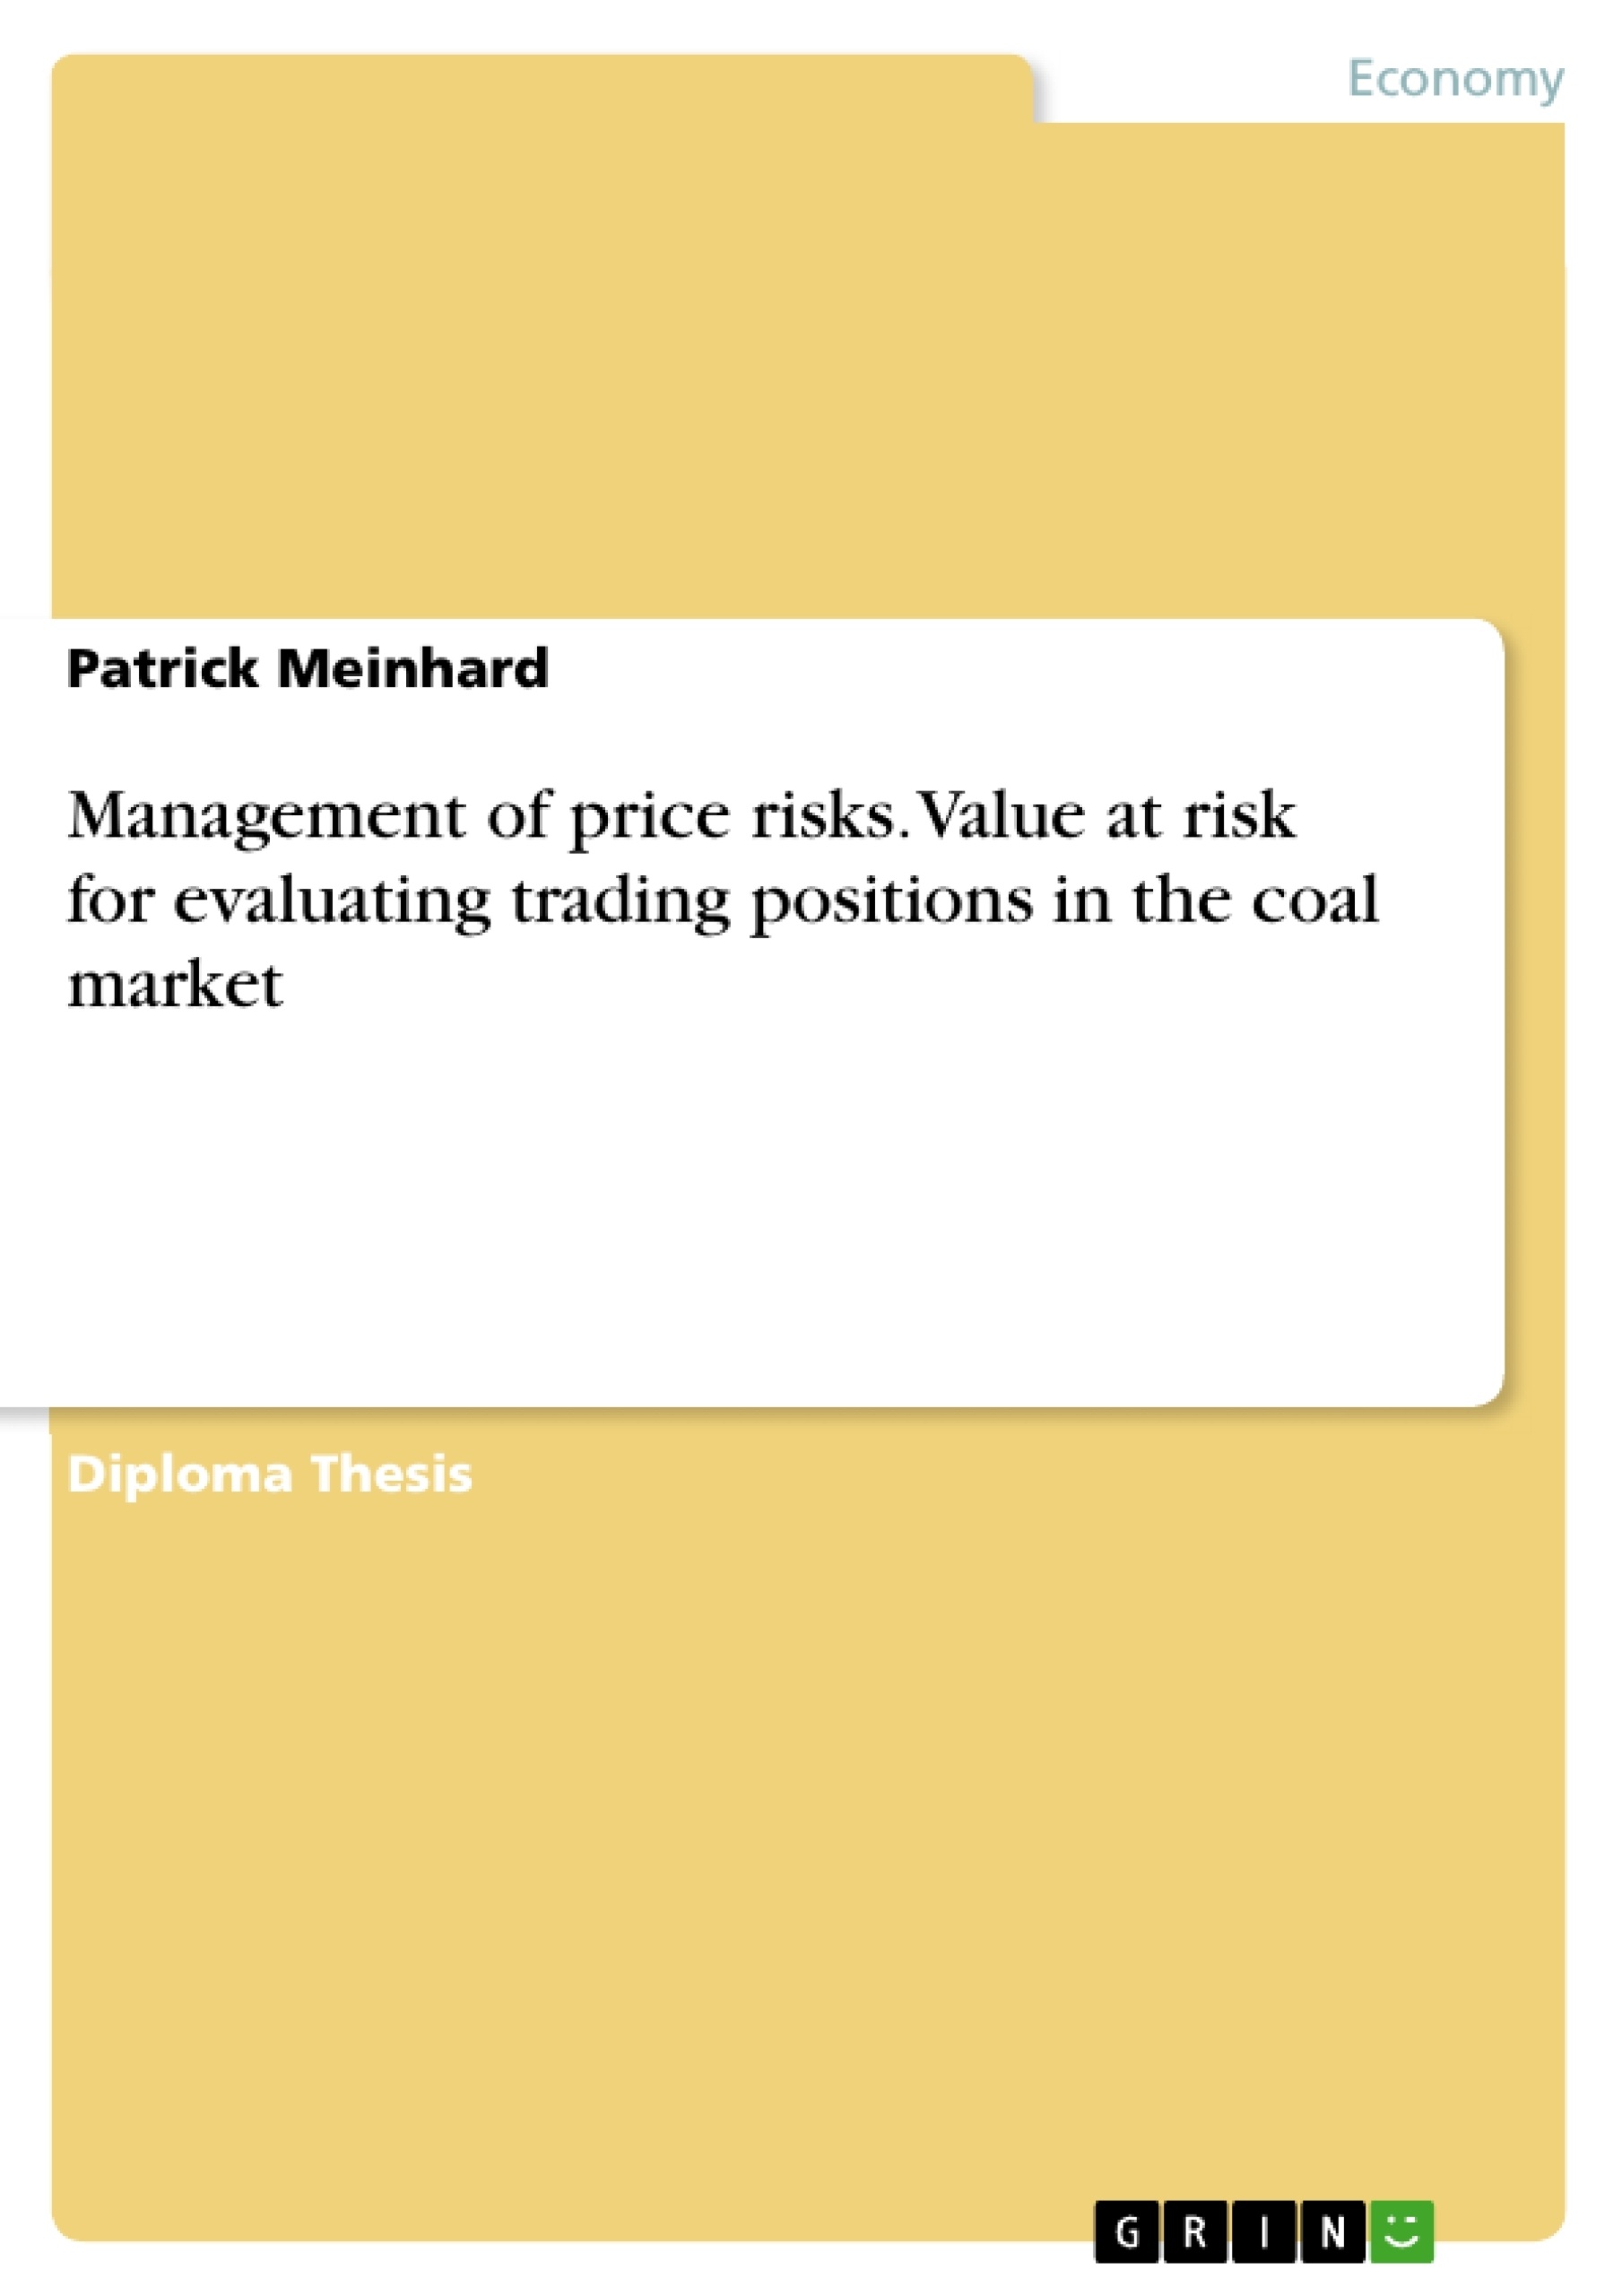 Title: Management of price risks. Value at risk for evaluating trading positions in the coal market